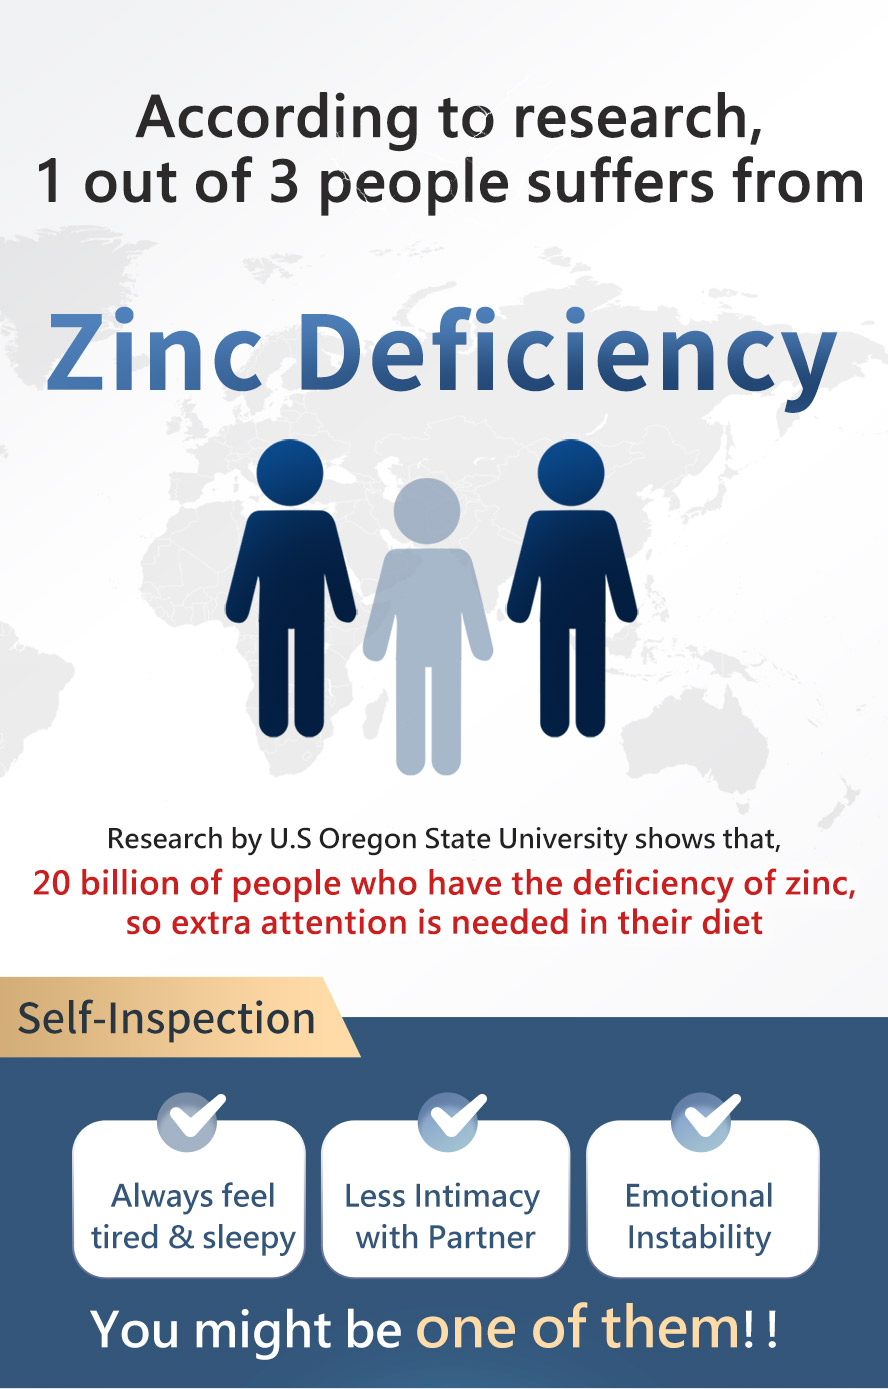 Zinc deficiency can lead to infertility, lowered motility, quantity and quality of man's reproductive ability 